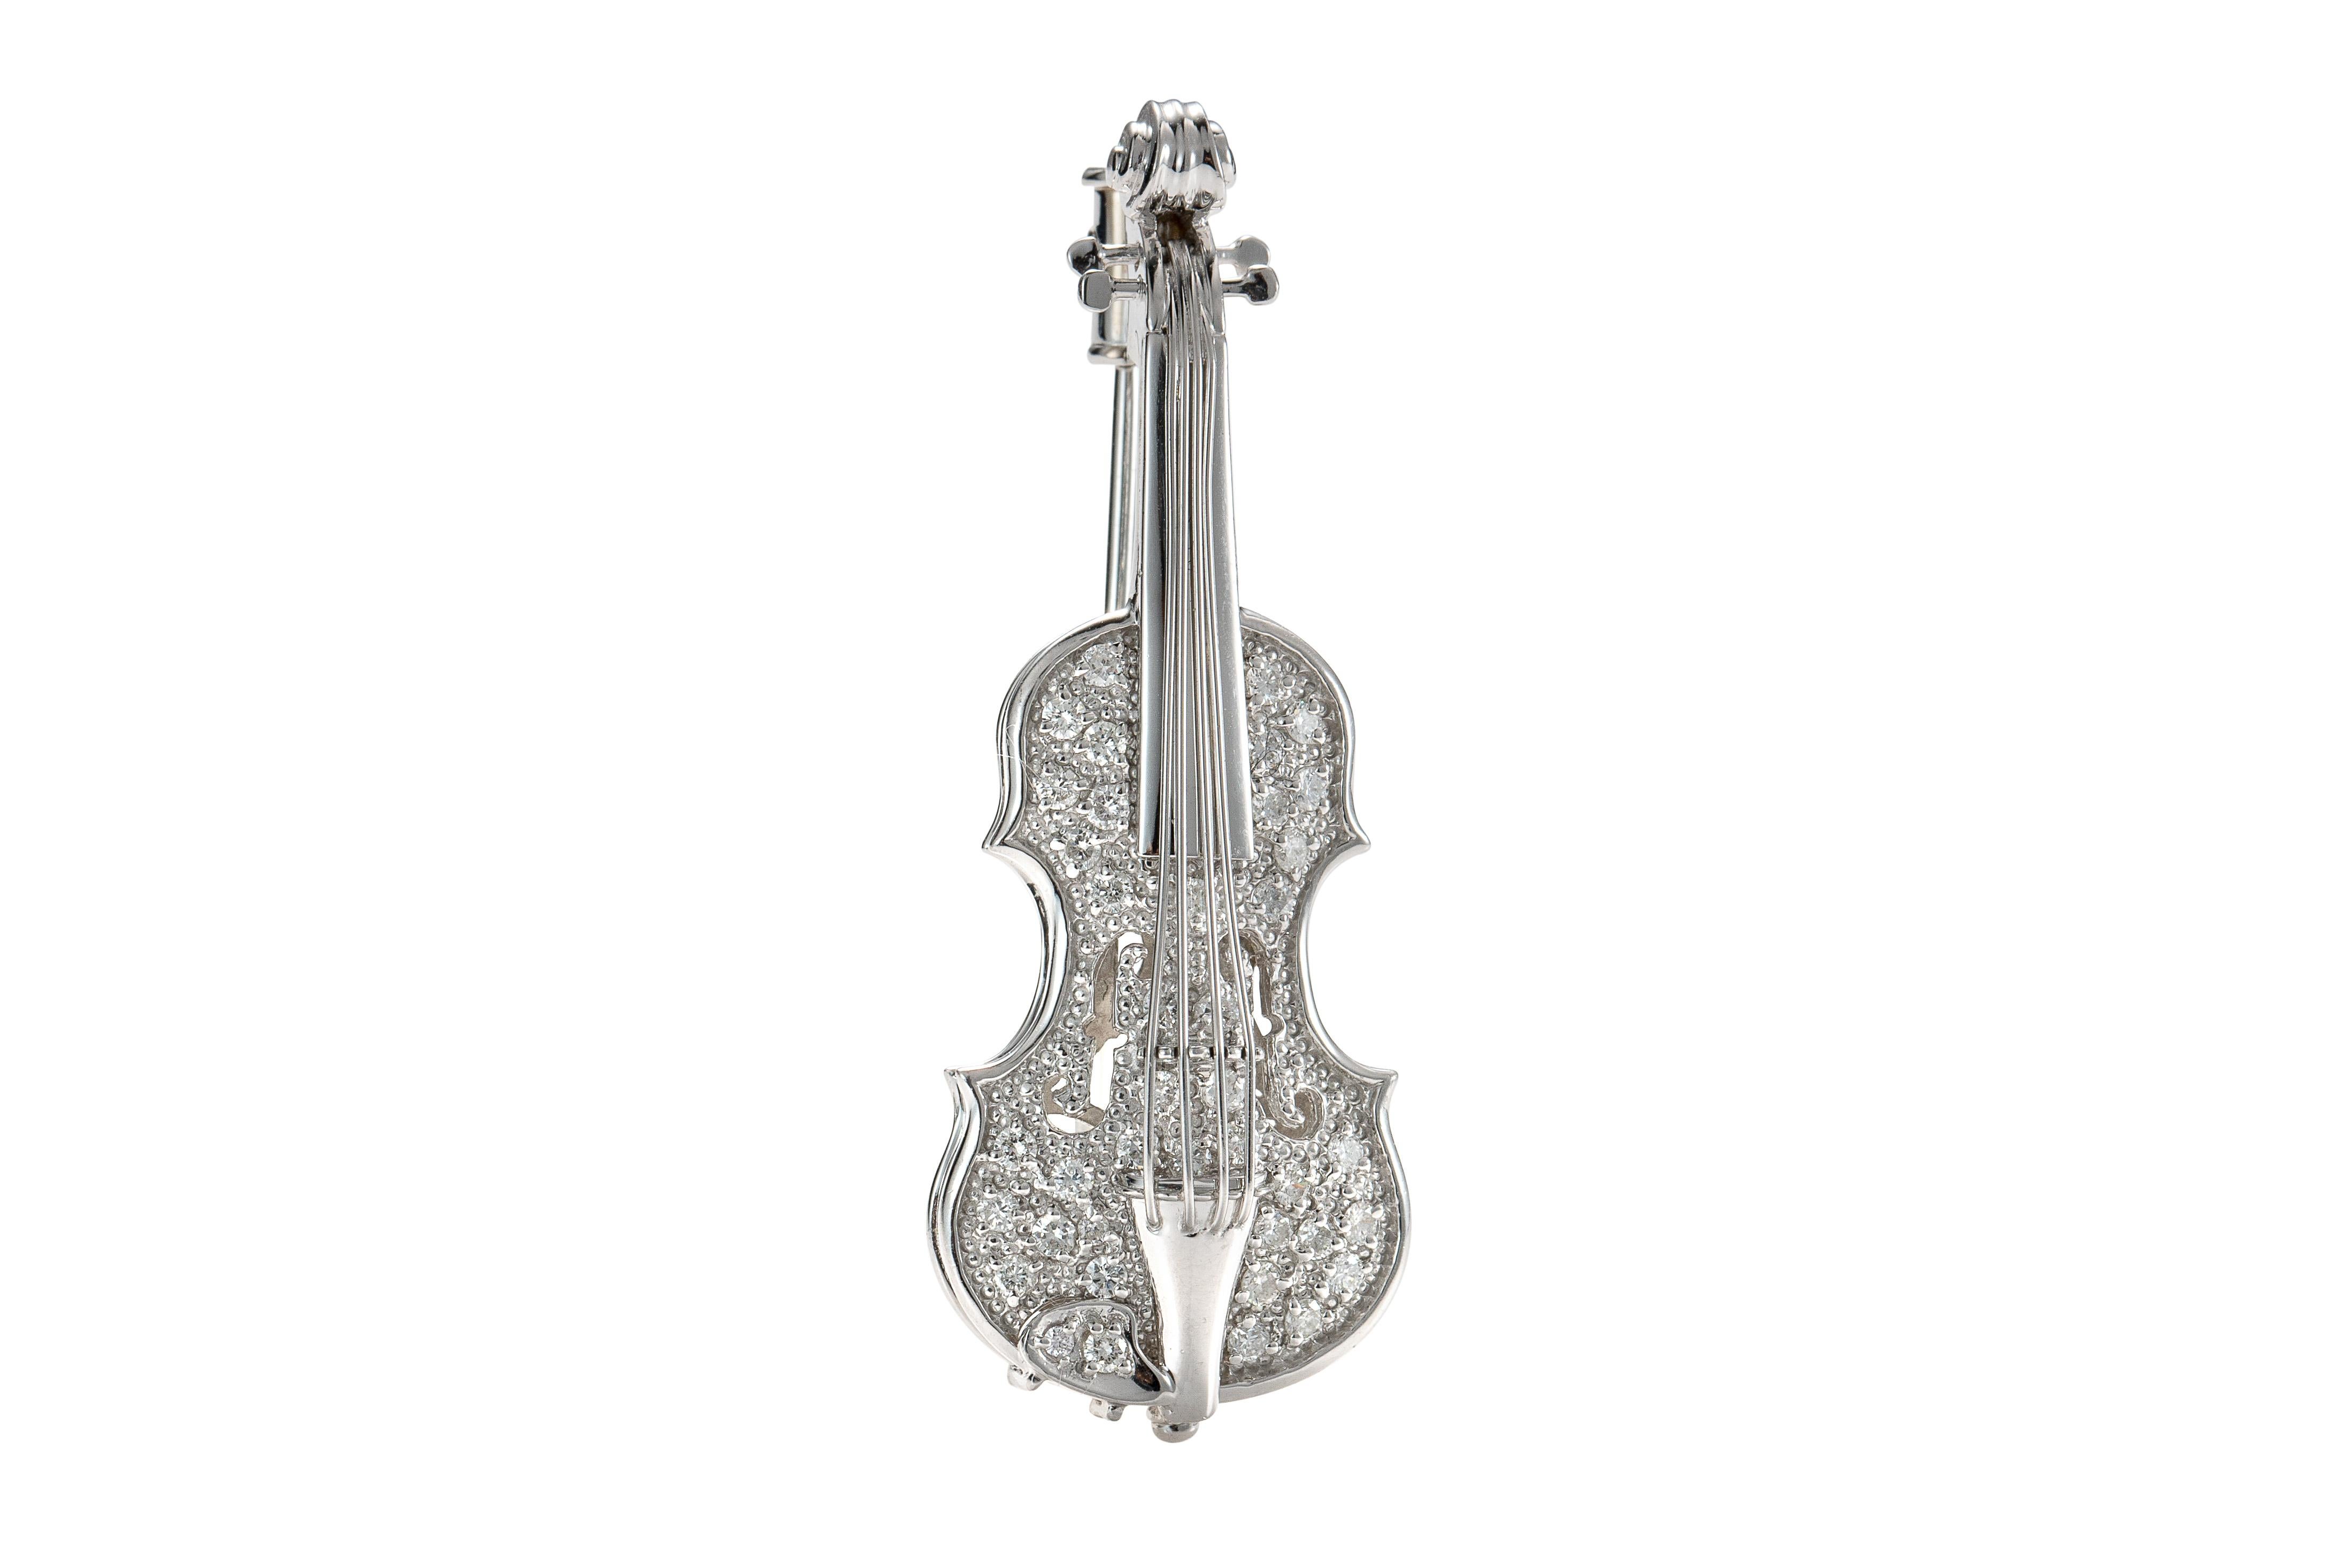 Item Details:
Metal type: 18 karat white gold
Weight: 10.3 grams
Measurement: 1.75 inch length x 2.5 inch width 

Diamond Details:
Cut: Round
Carat: .35 carat total weight
Color: G-H
Clarity: VS-SI

This is a beautiful Violin pin / brooch from the